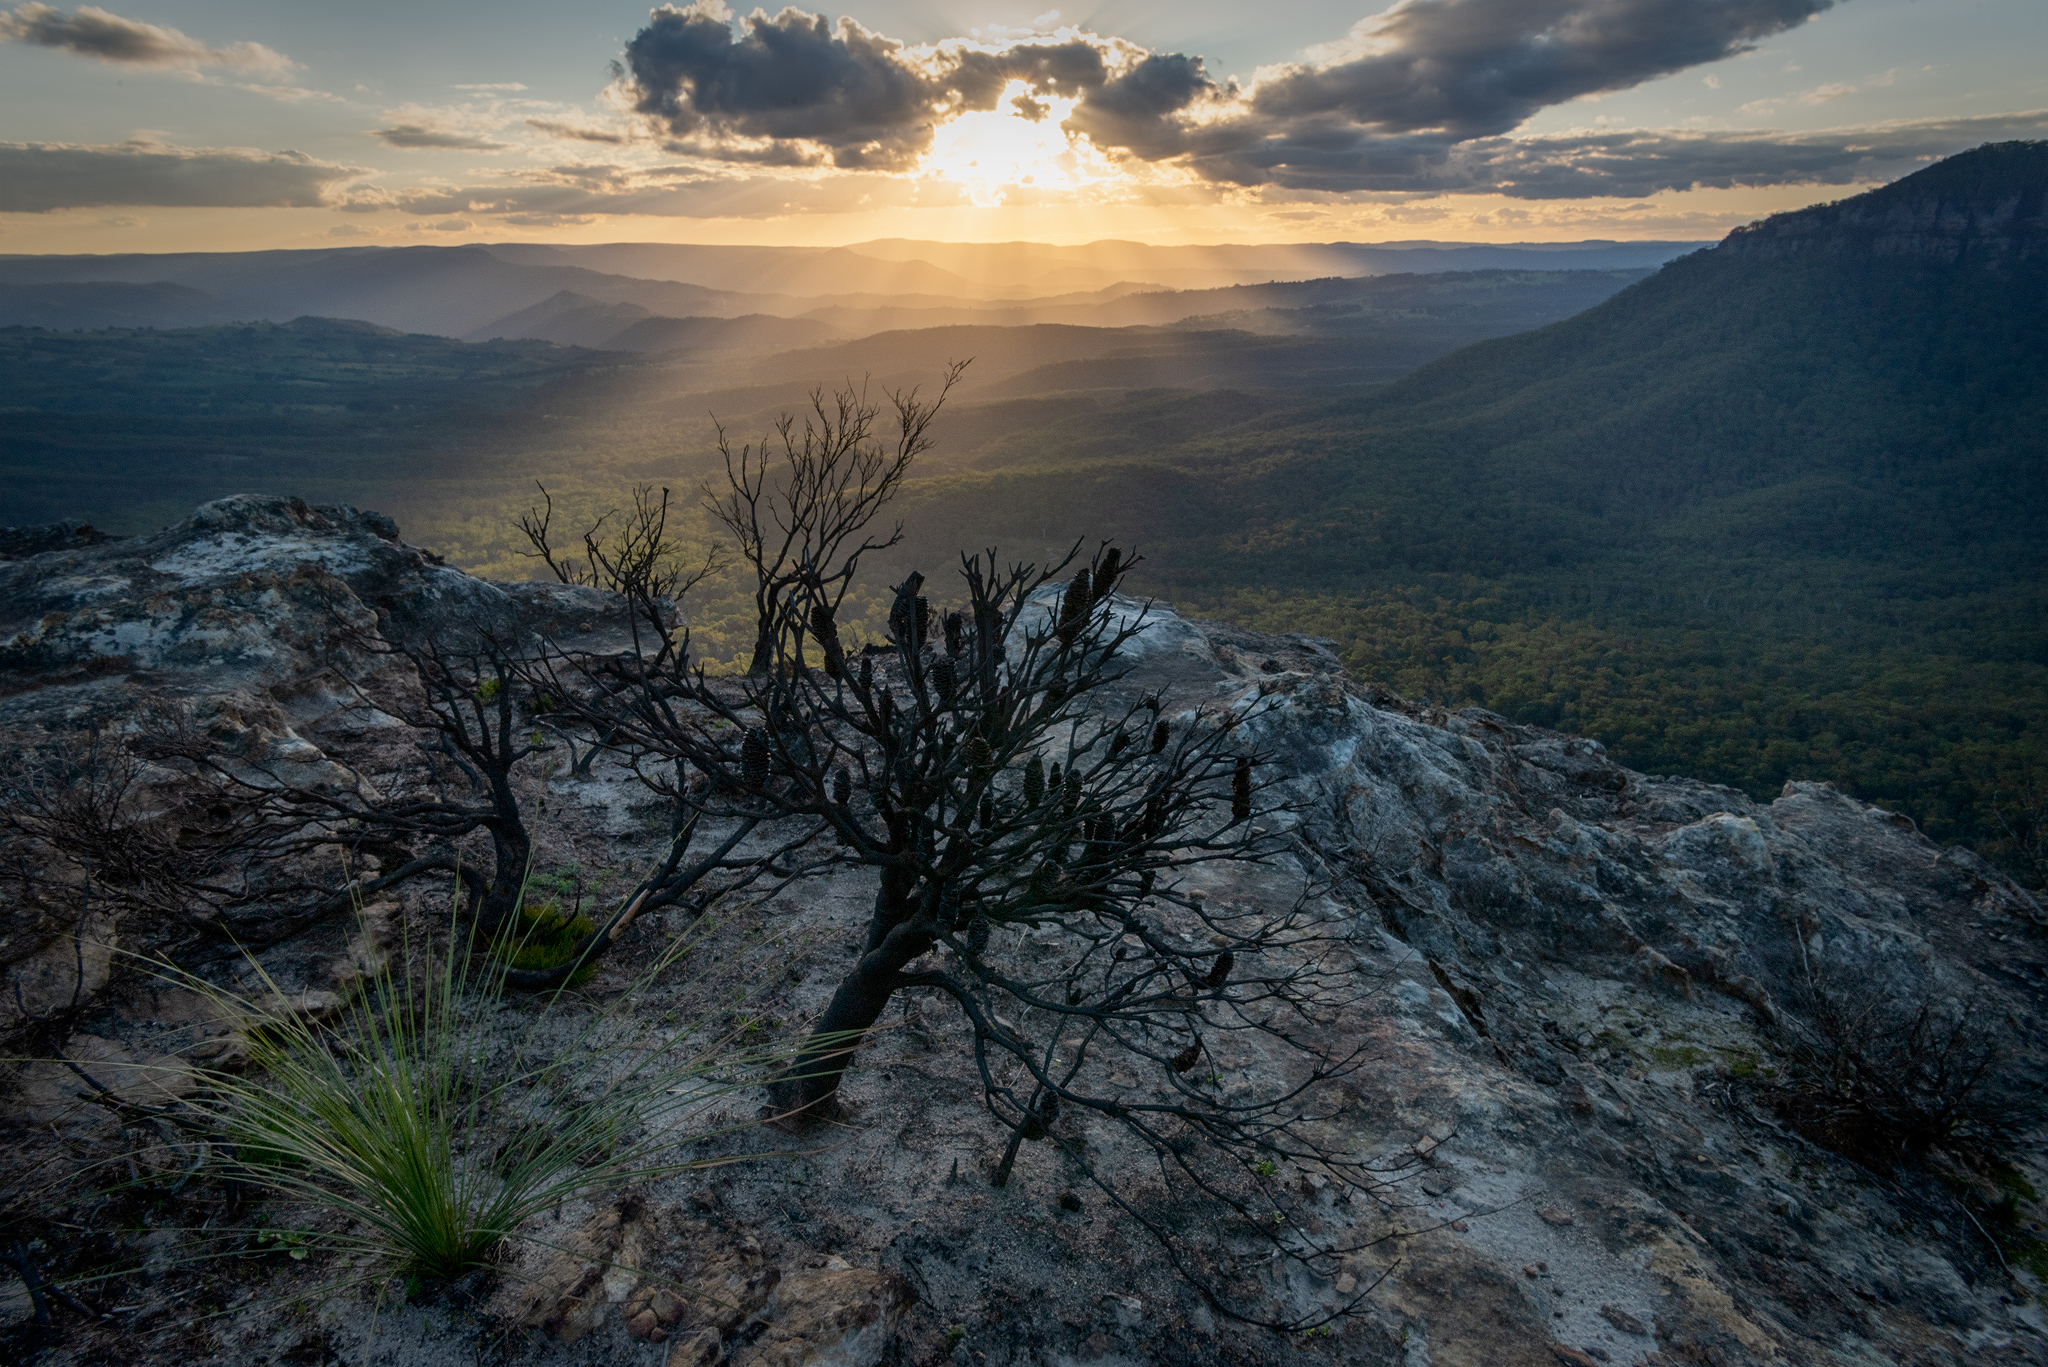 Looking west over megalong valley on sunset